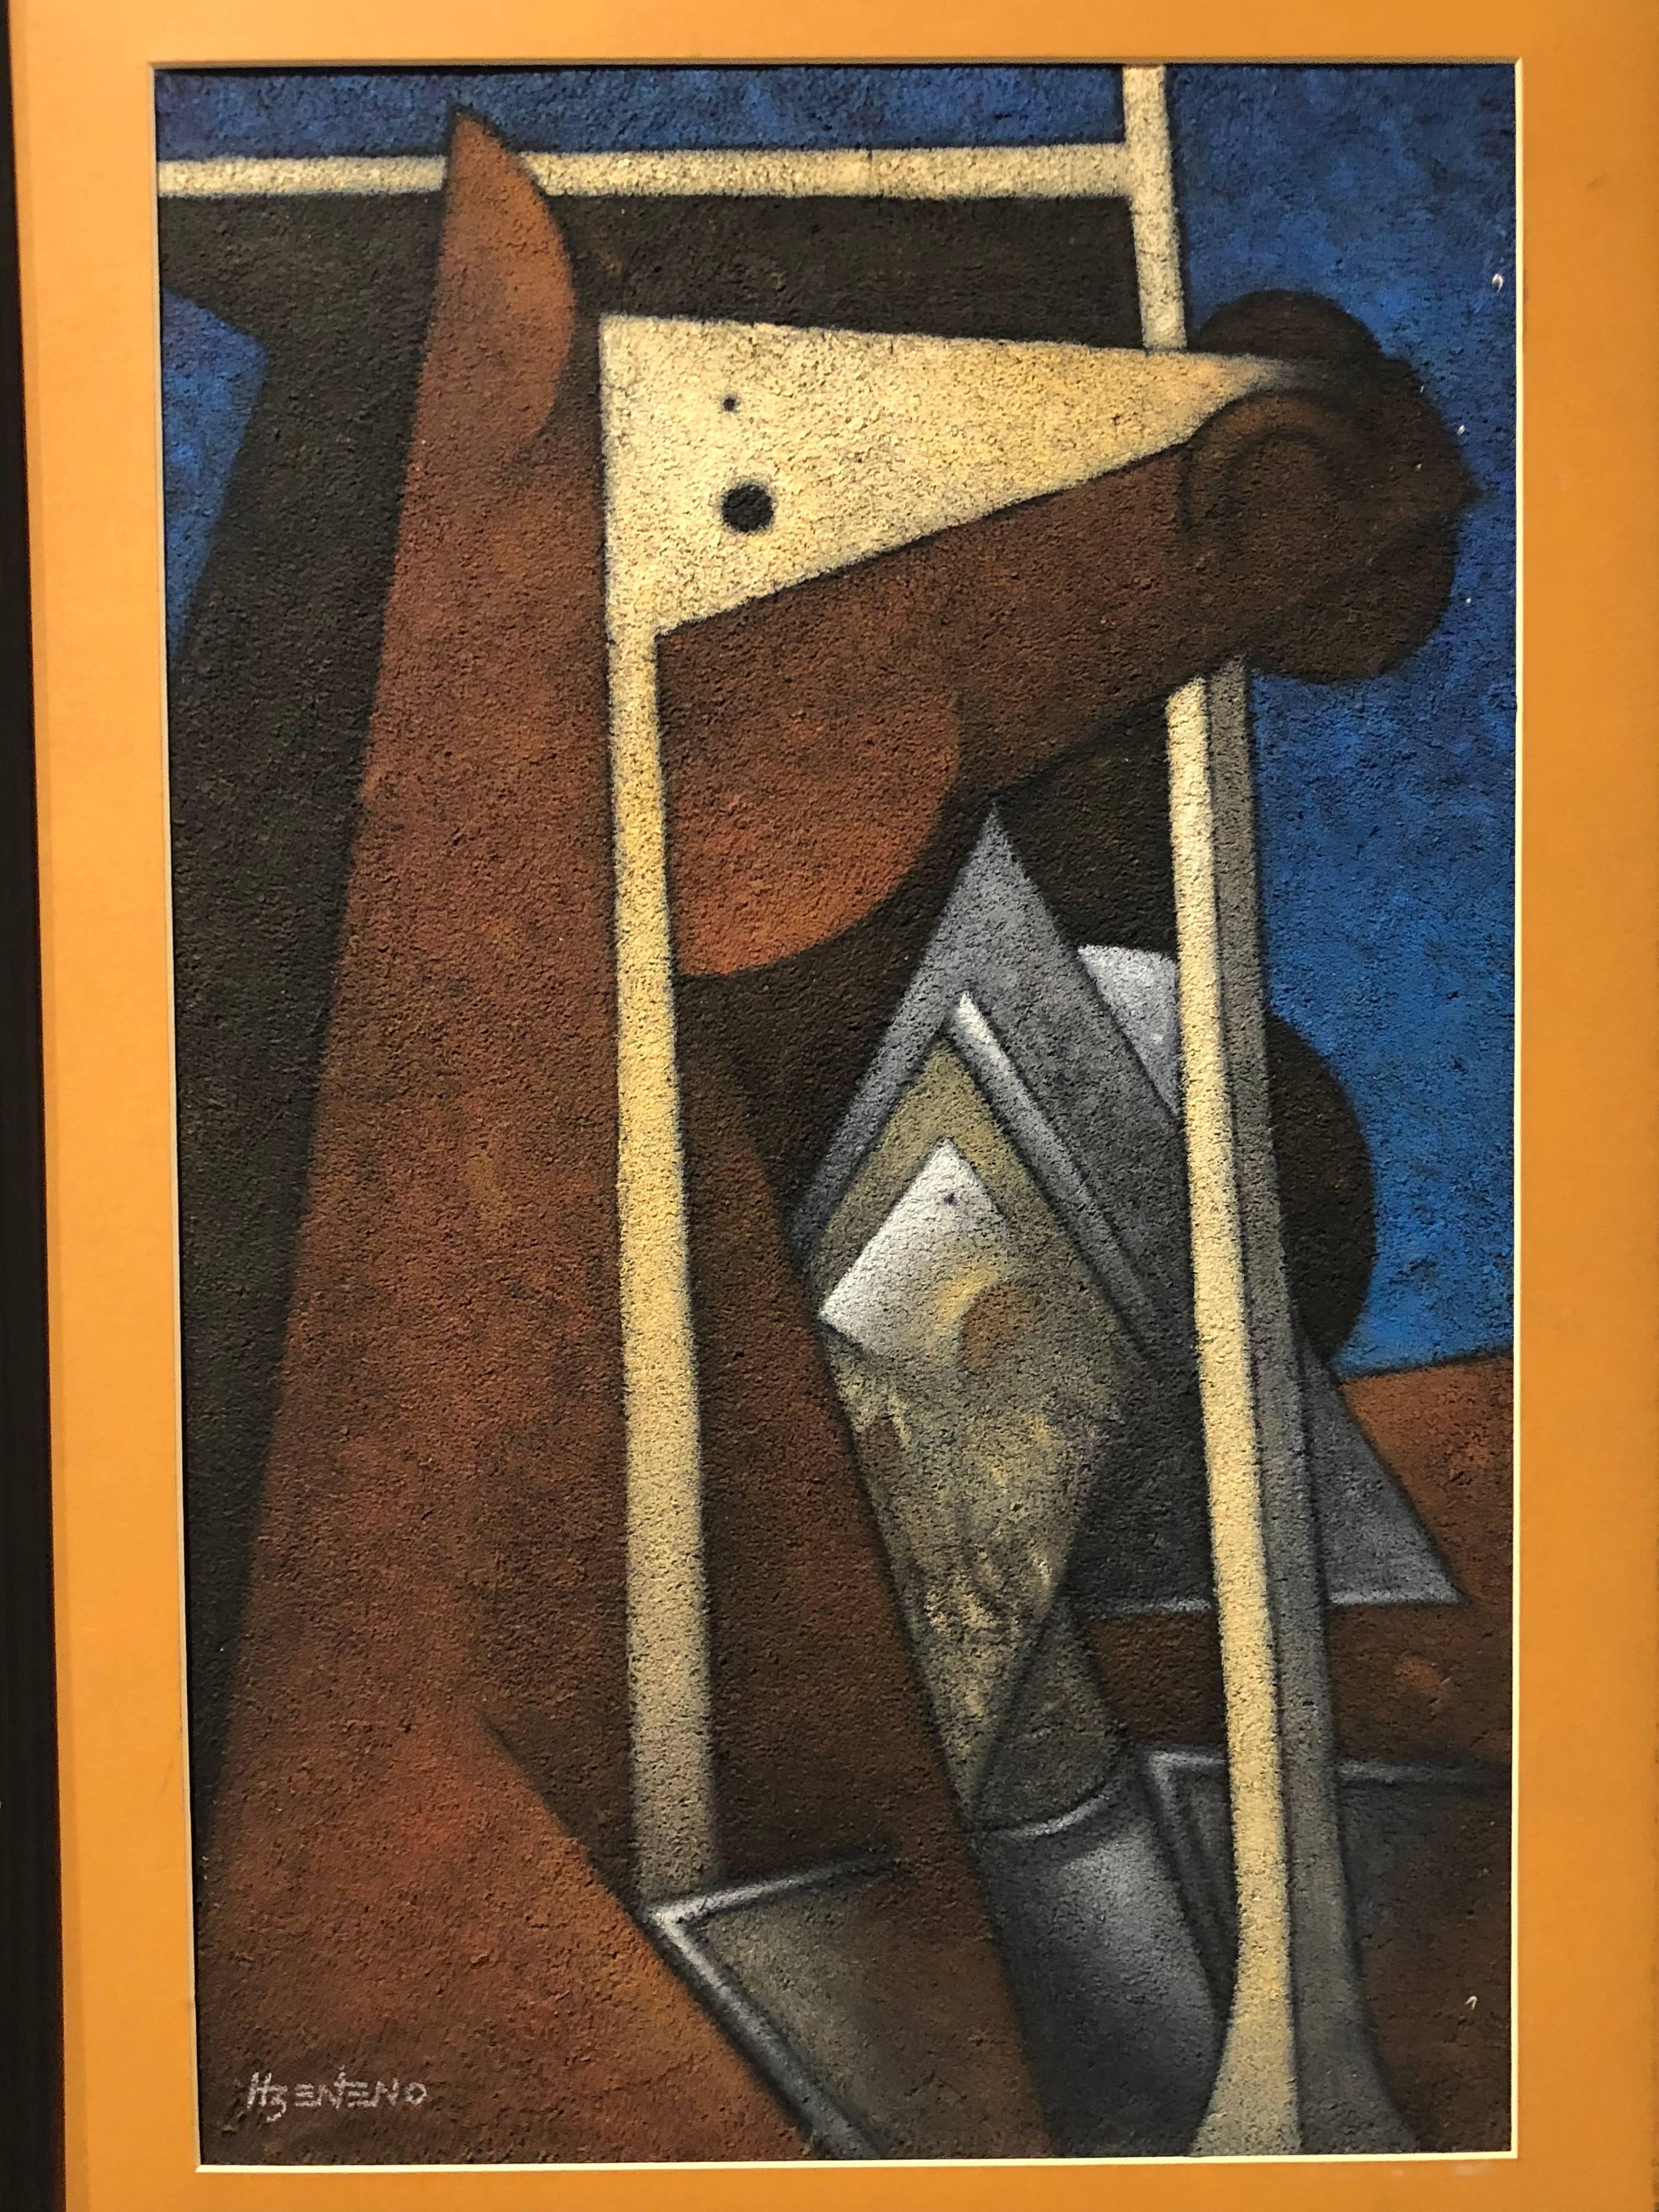 Beautiful horse painting with a textured finish and bordered. Cubist style by Mexican Artist, H Zenteno. Comes in original frame.